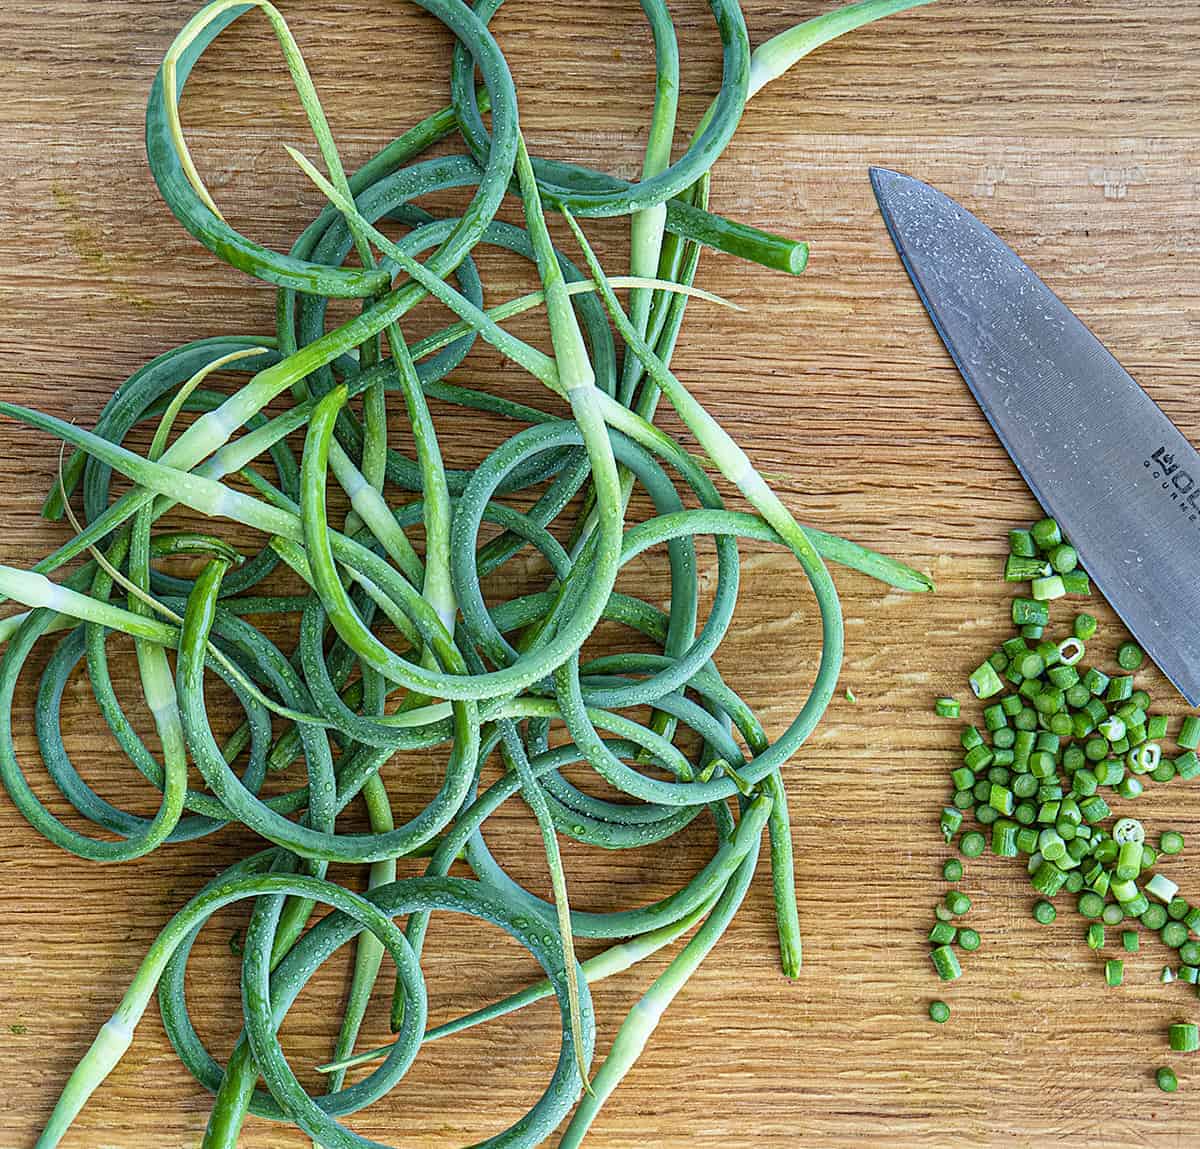 Overhead Image of Garlic Scapes with some Chopped Next to a Knife